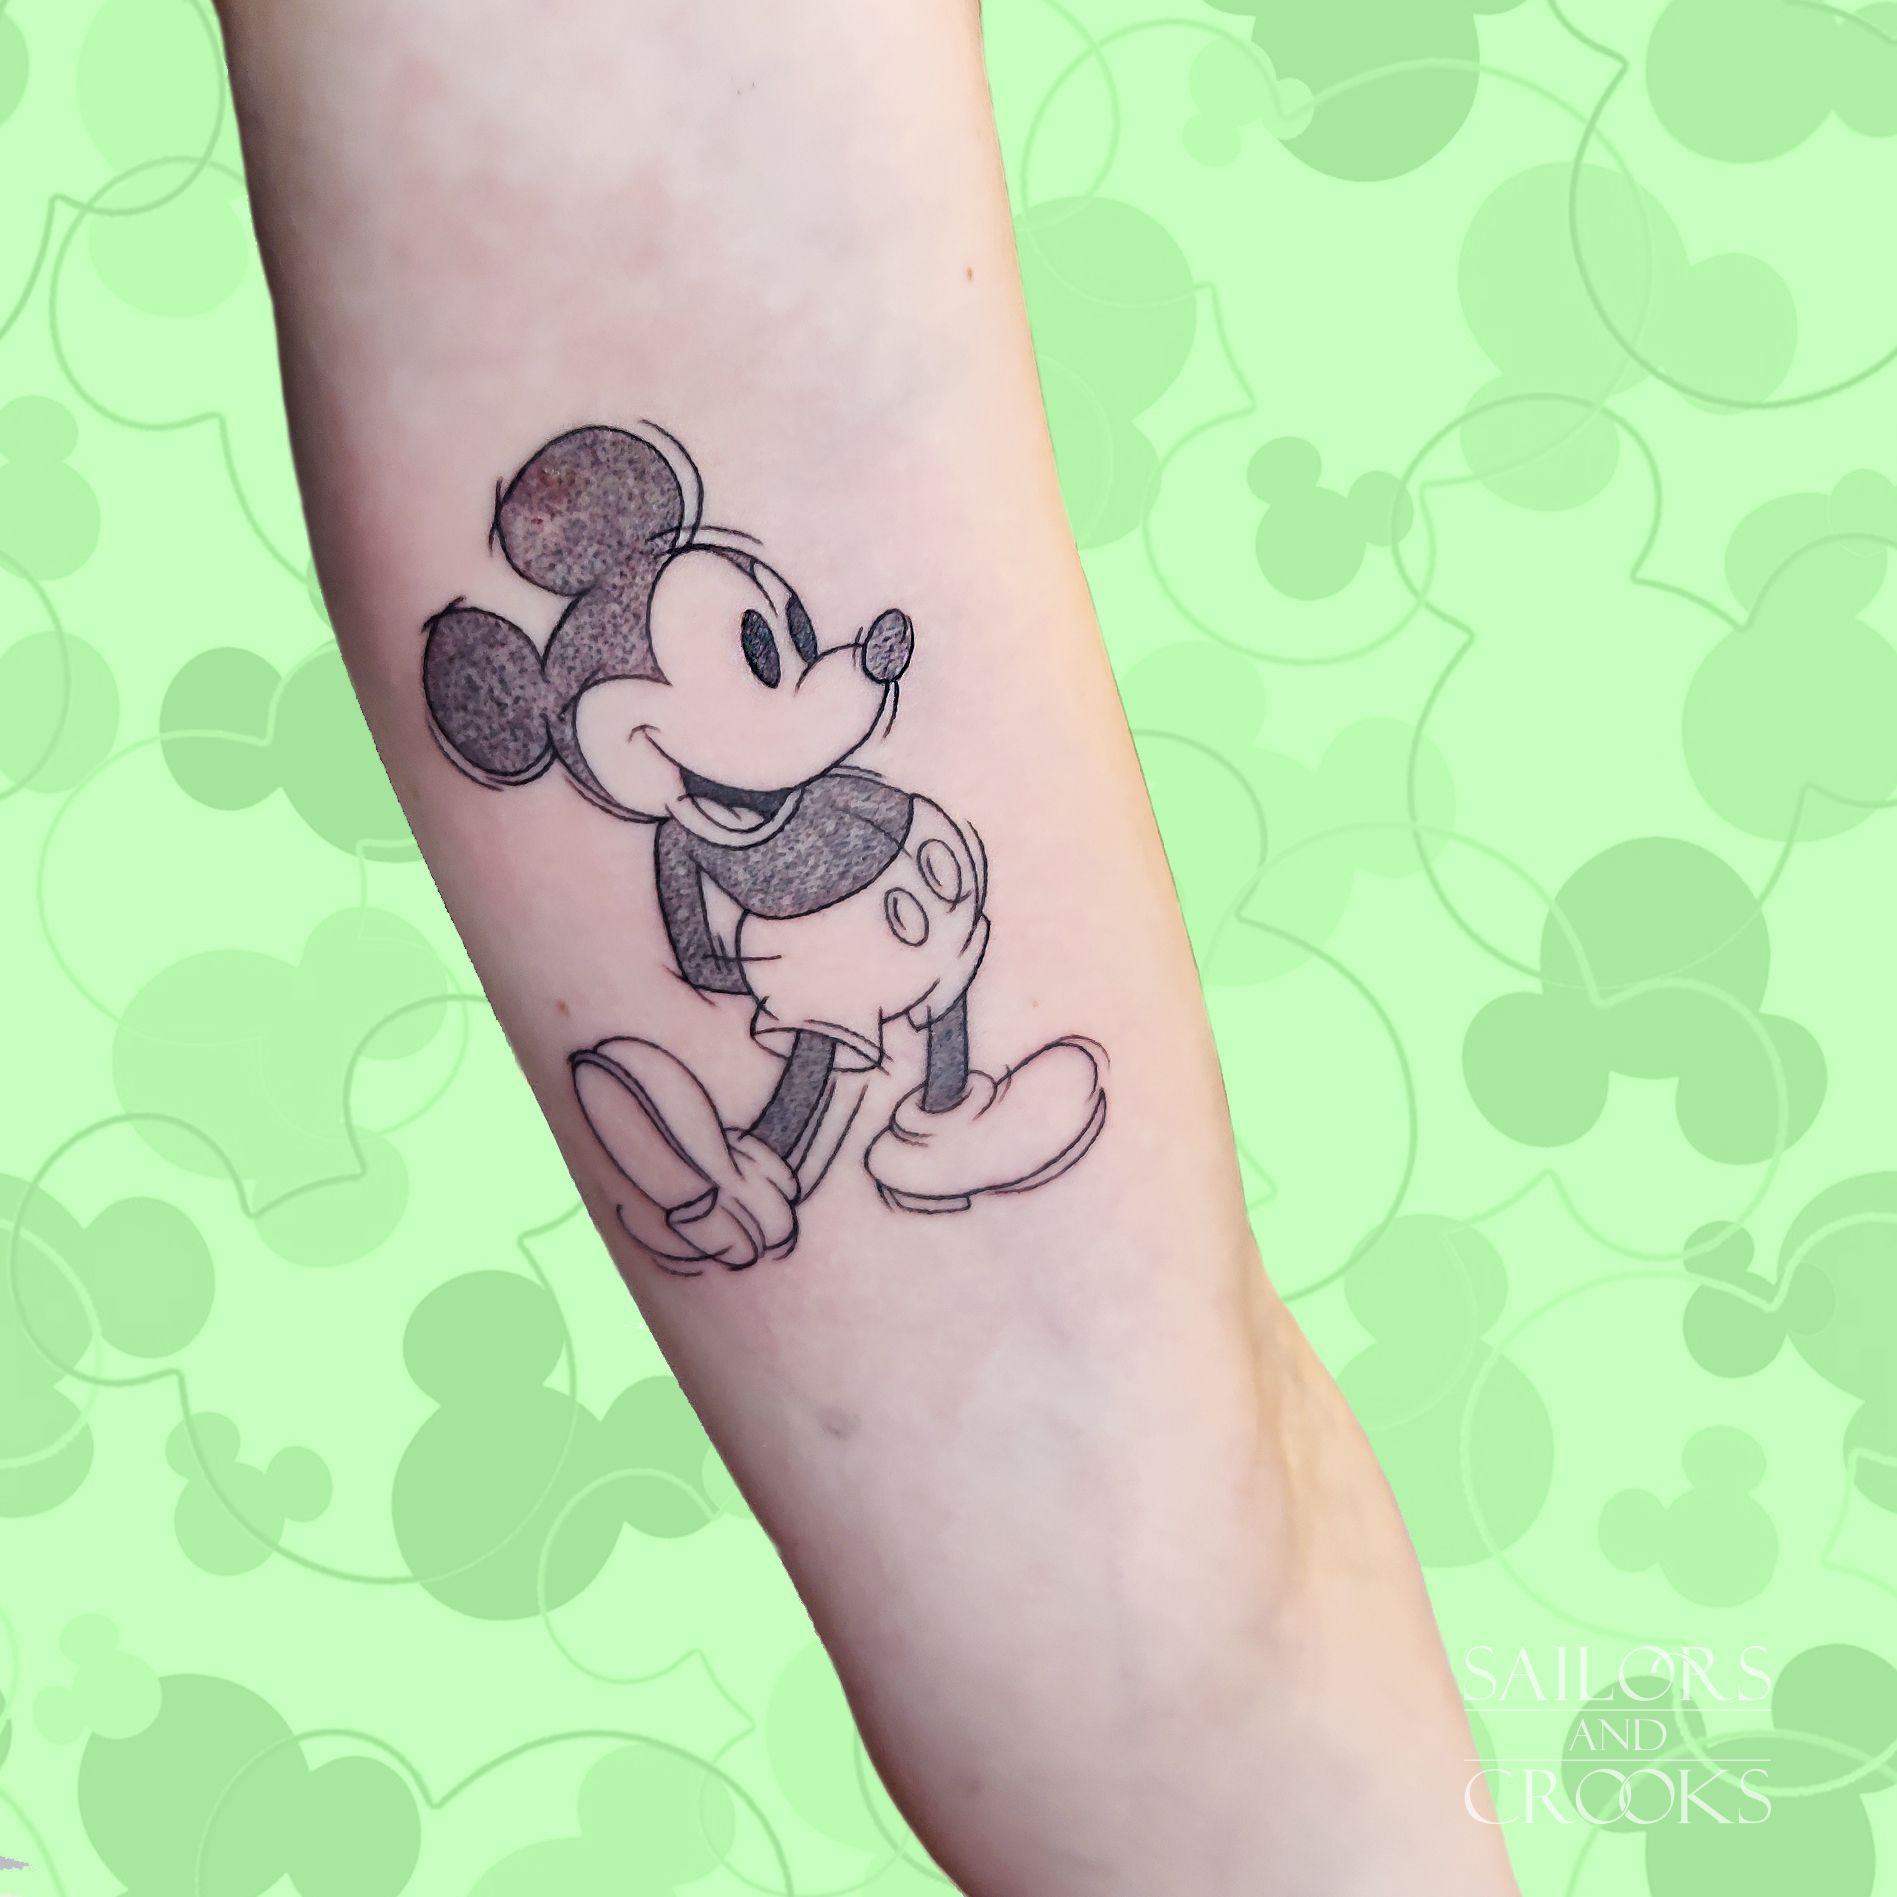 77 Disney Tattoos To Unleash Your Magic Power - Our Mindful Life